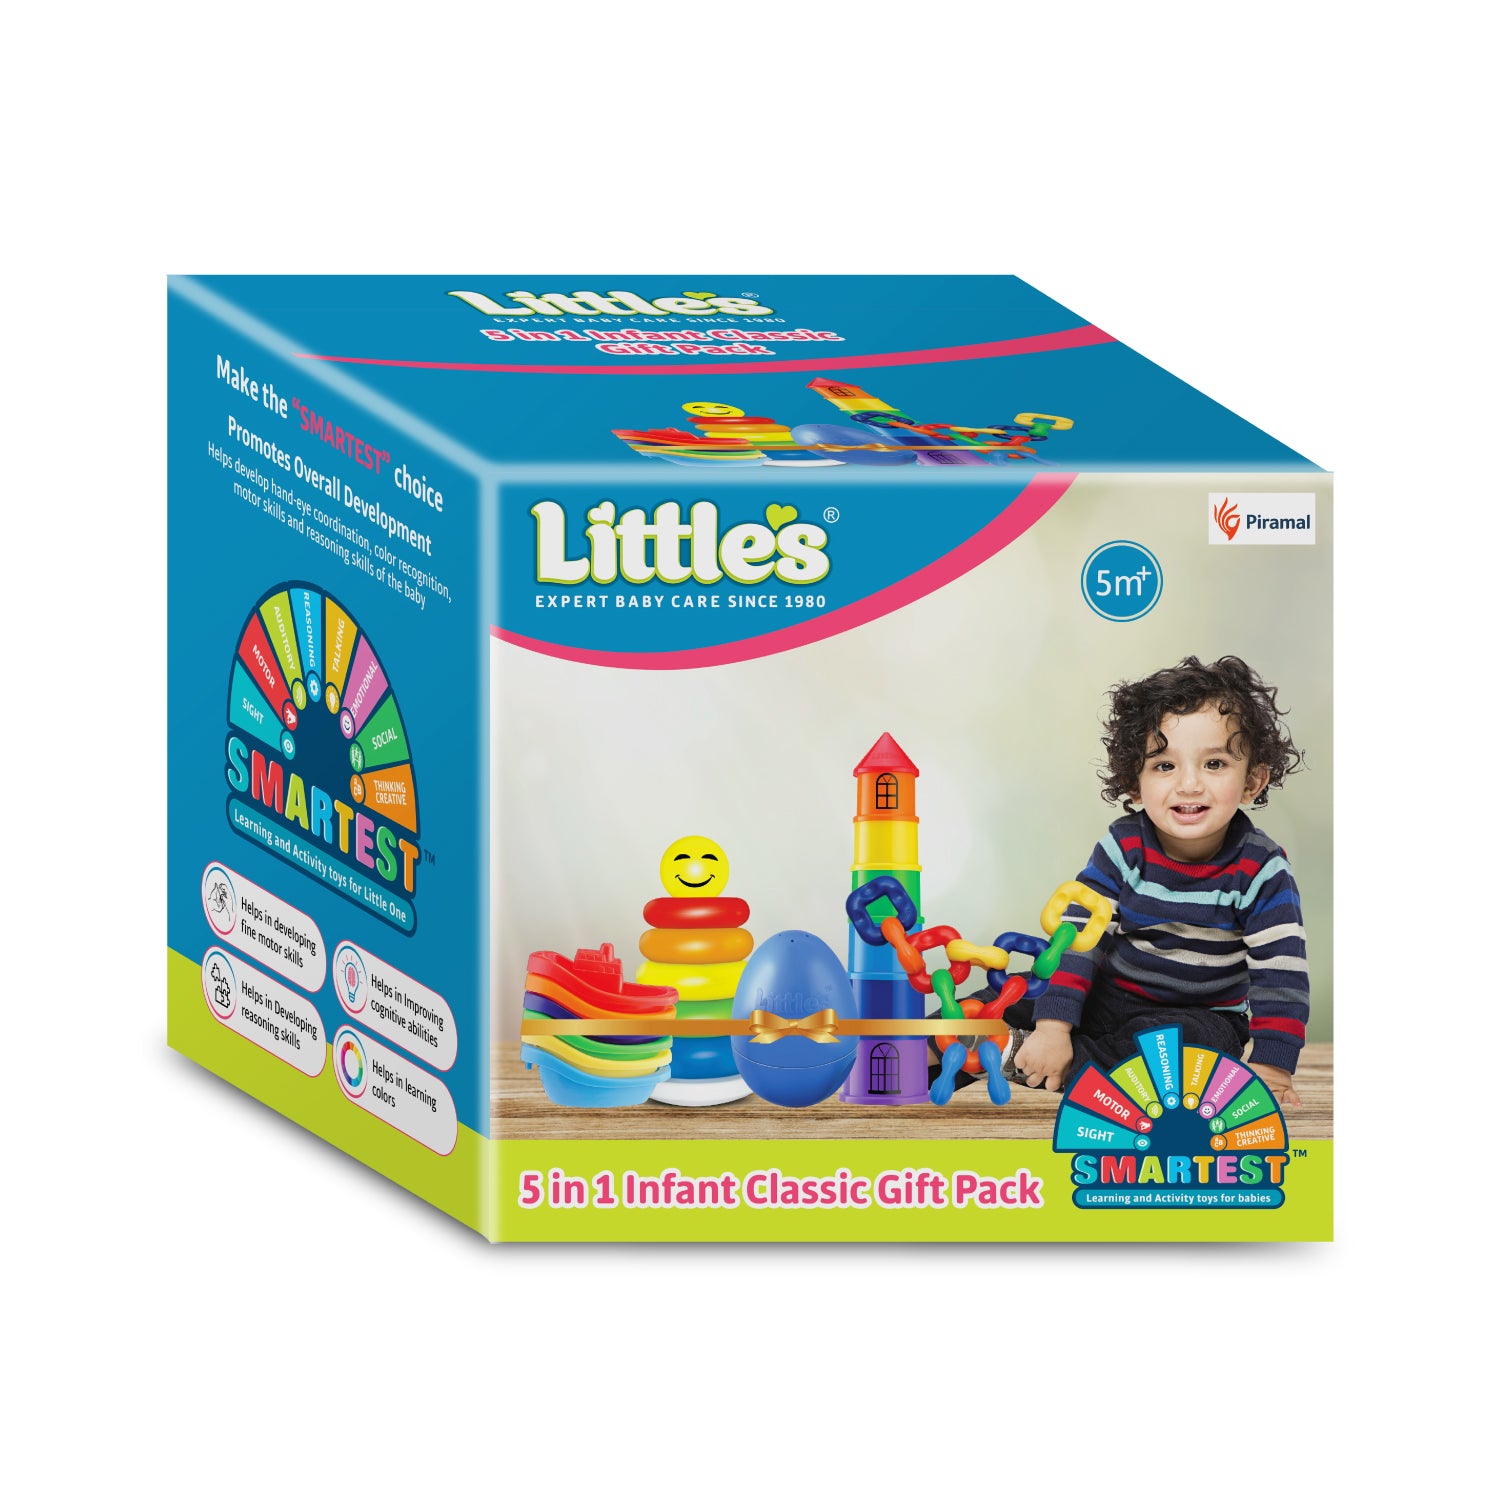 Littles 5in1 infant classic gift pack